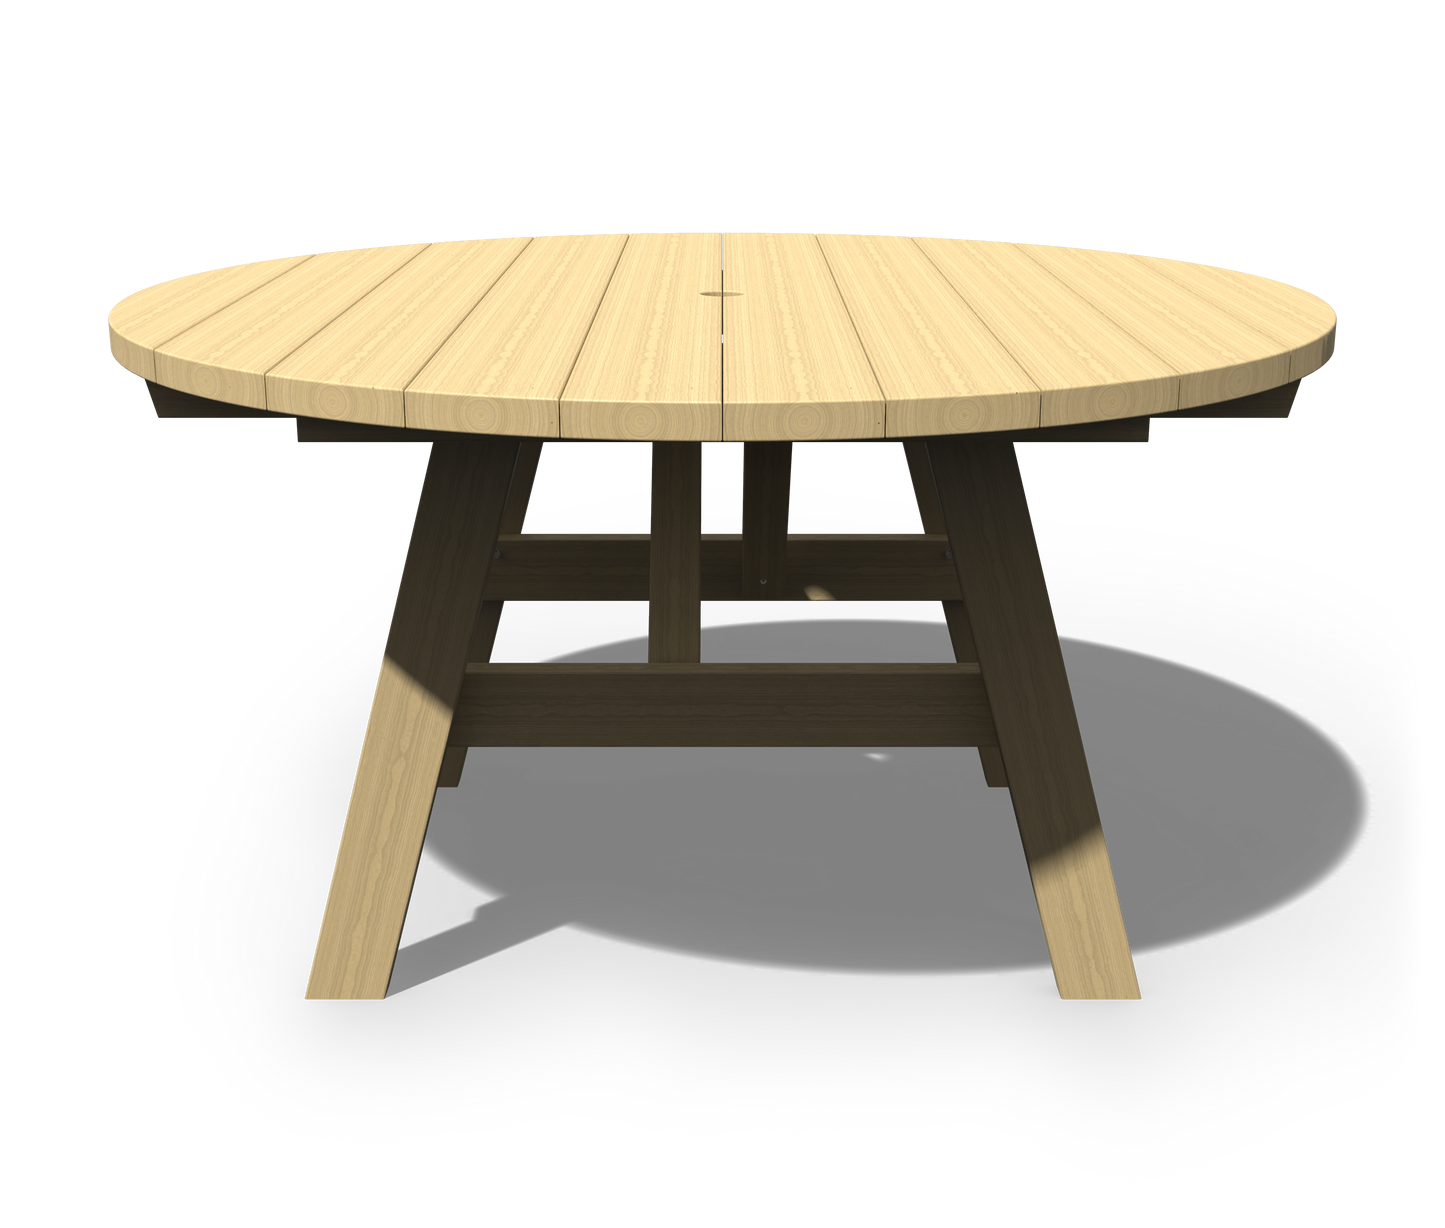 Patiova Pressure Treated Pine 54" Round Picnic Table - LEAD TIME TO SHIP 3 WEEKS